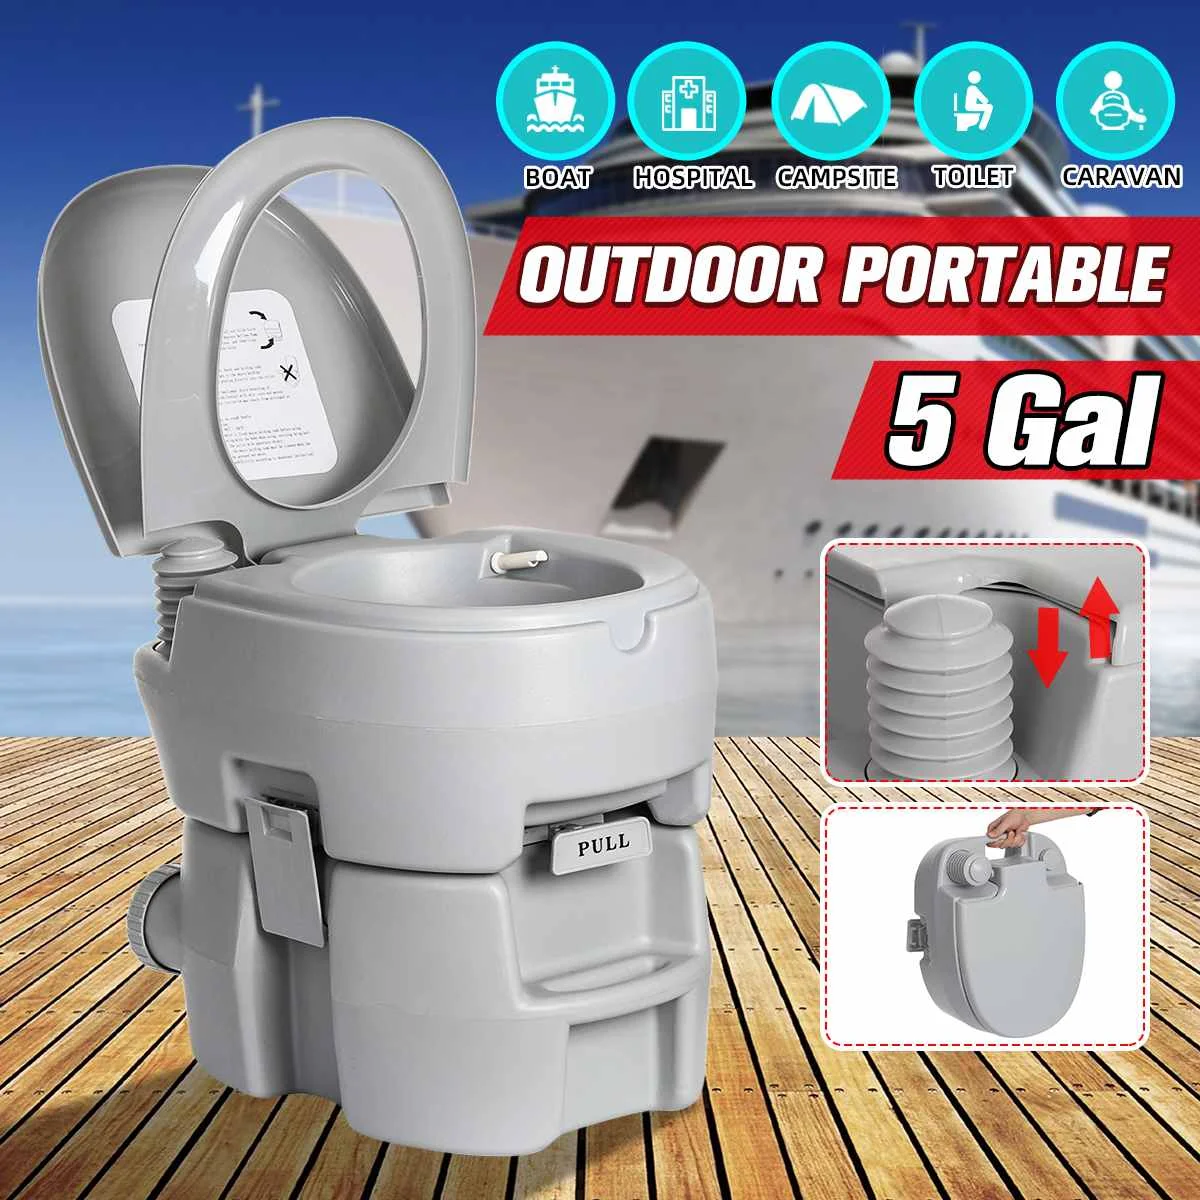 

5 Gallon 20L Portable Toilet Flush Outdoor Indoor Travel Camping Commode Potty Caravan Mobile Toilets Hospital Boat Adult Kids